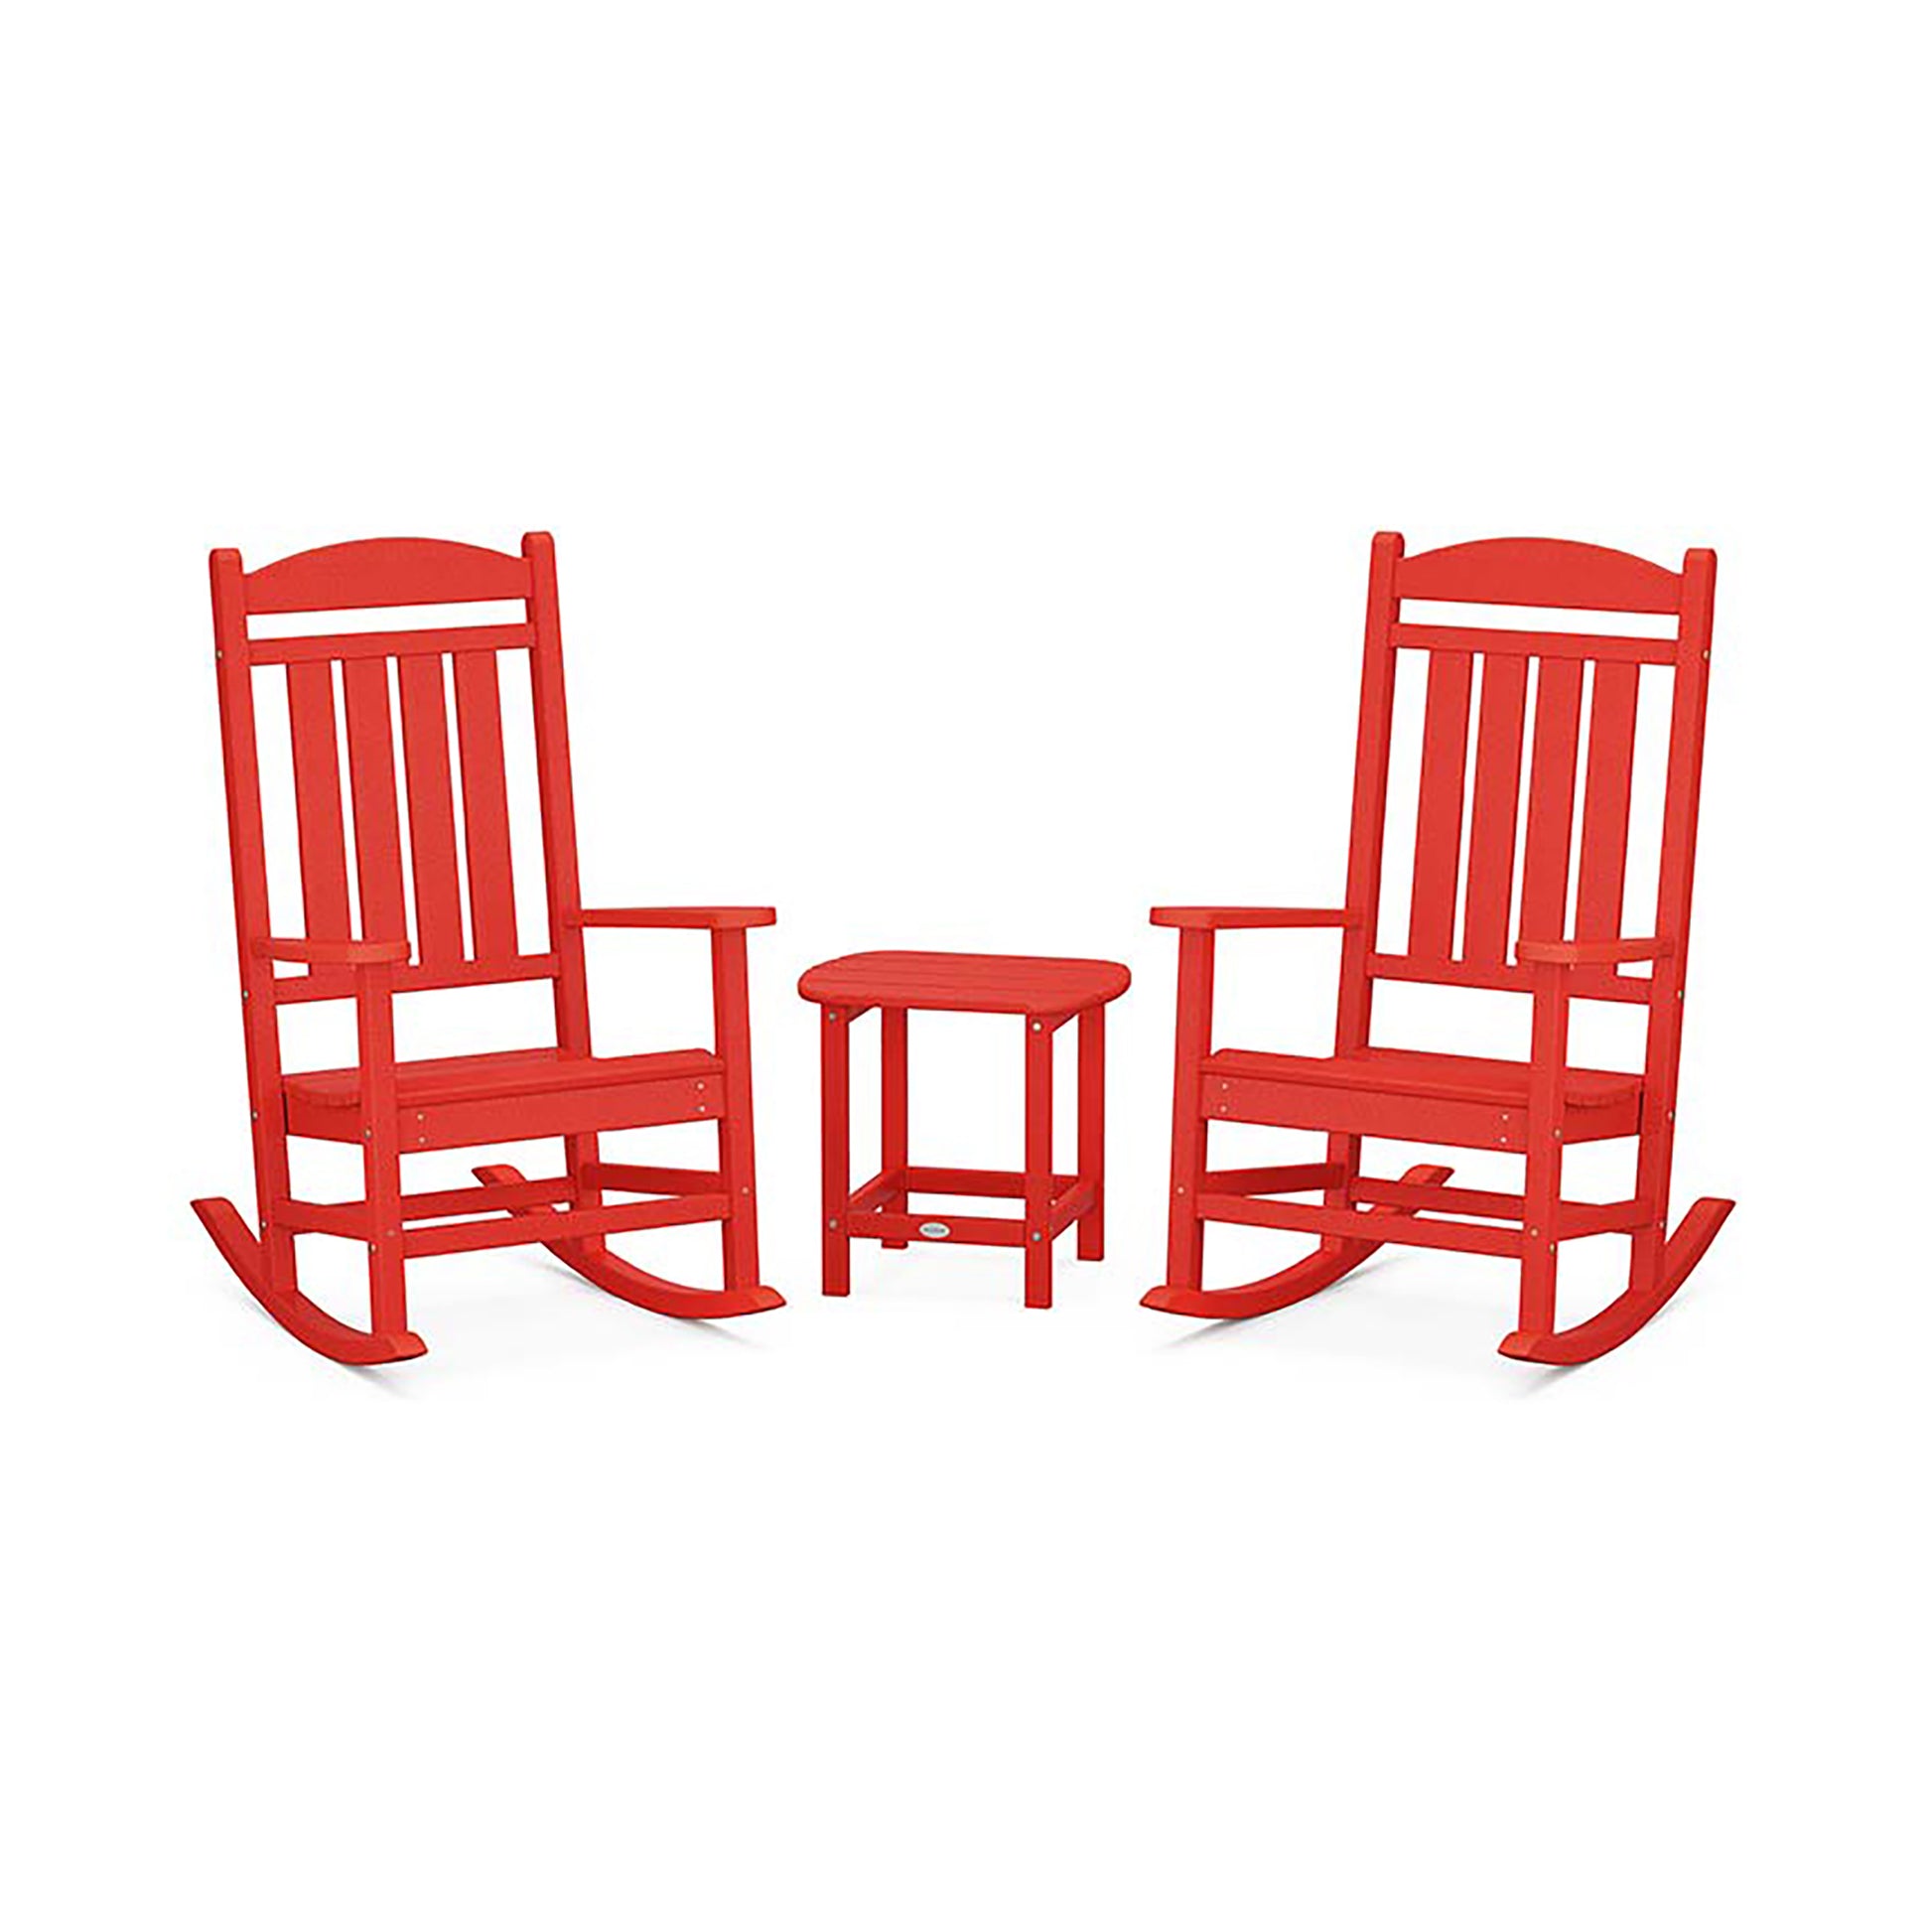 Two red POLYWOOD Presidential Outdoor Rocking Chairs facing each other with a small red stool in between, set against a plain white background.